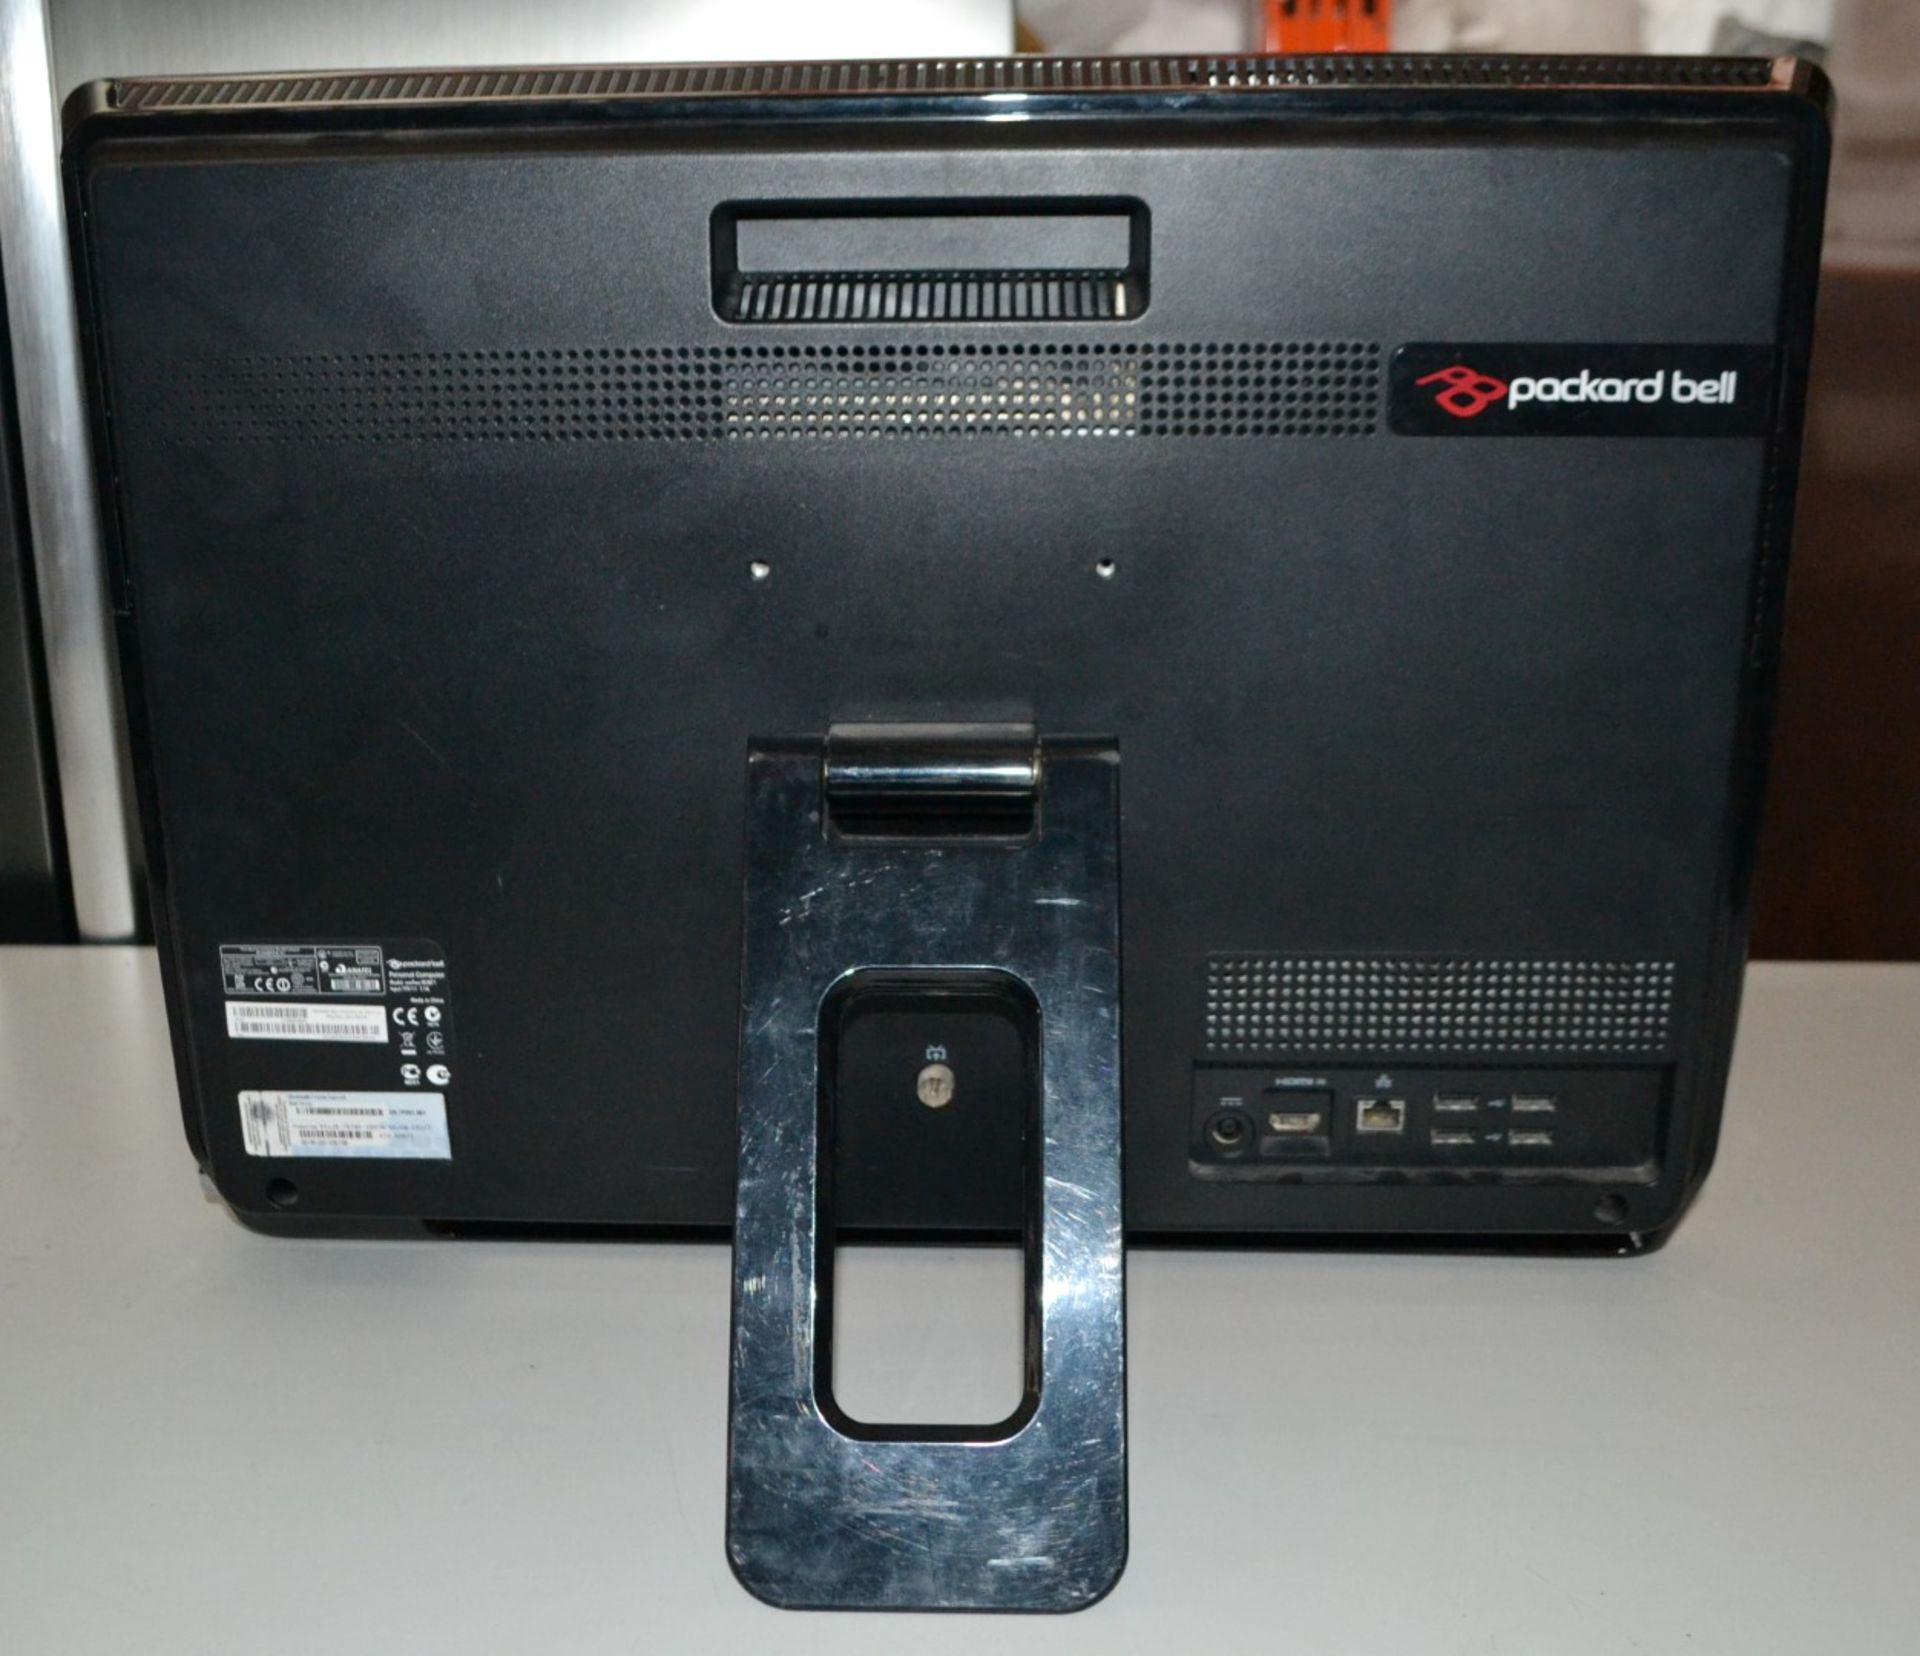 1 x 21" Packard Bell OneTwo M 13871 Personal Computer - Ref: BLT385 - CL349 - Location: WA14 - Image 6 of 10